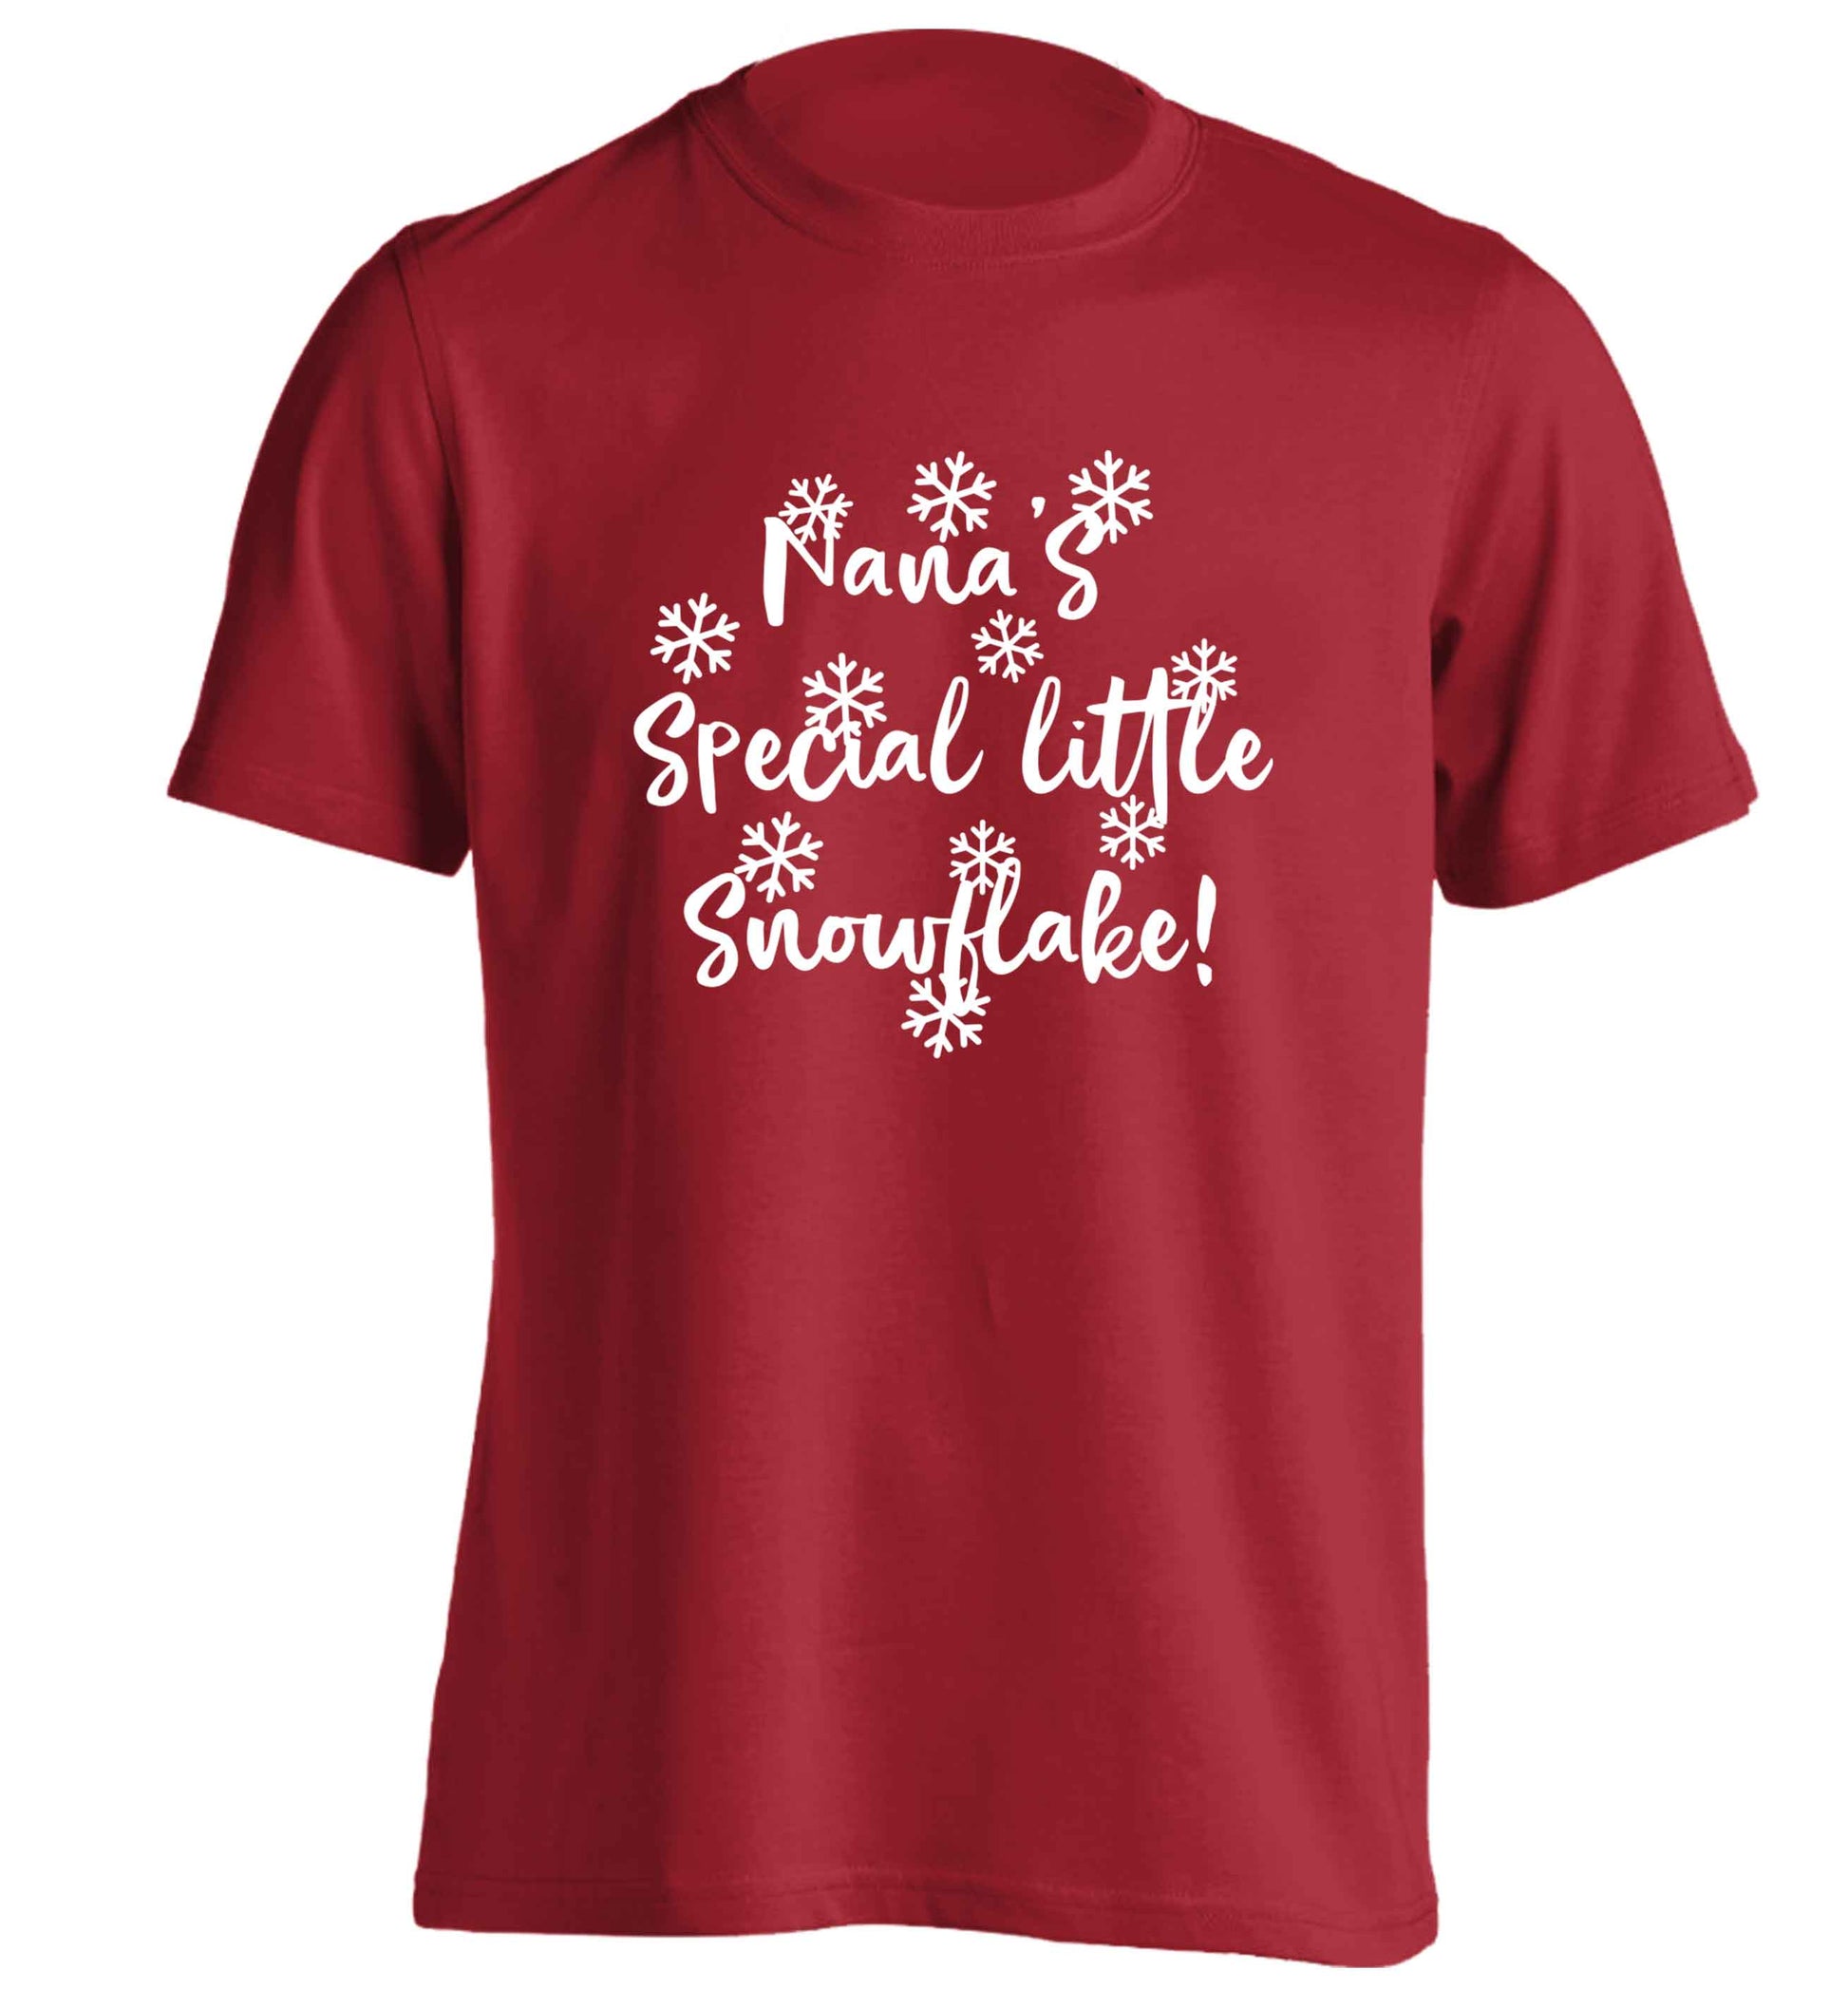 Nana's special little snowflake adults unisex red Tshirt 2XL